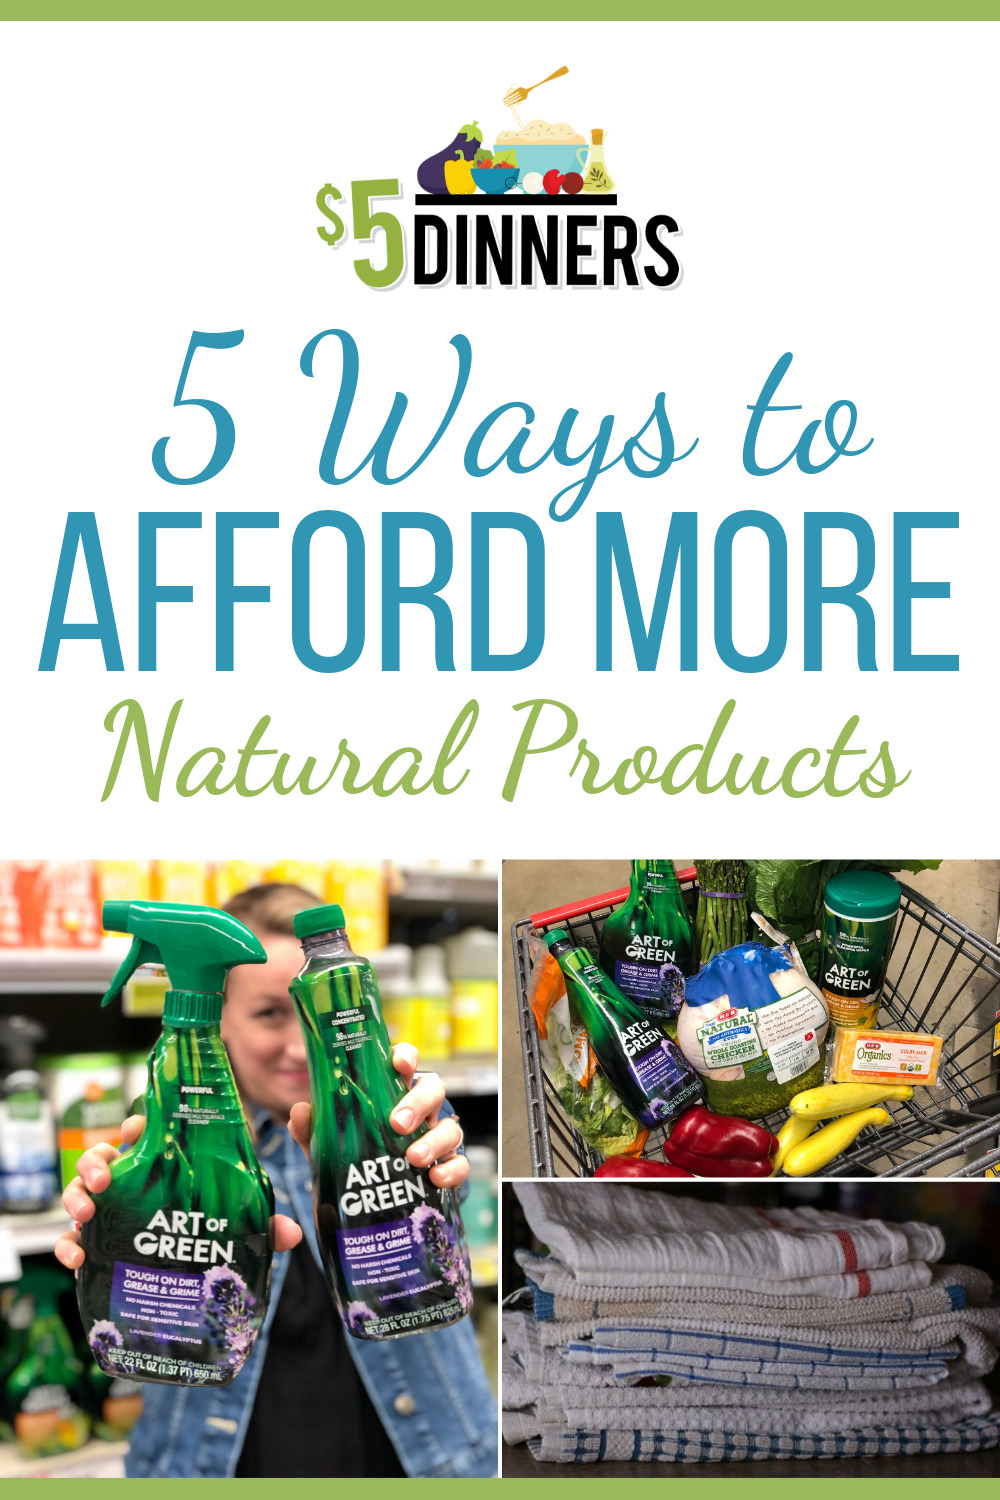 5 Ways to Afford More Natural Products and Ingredients